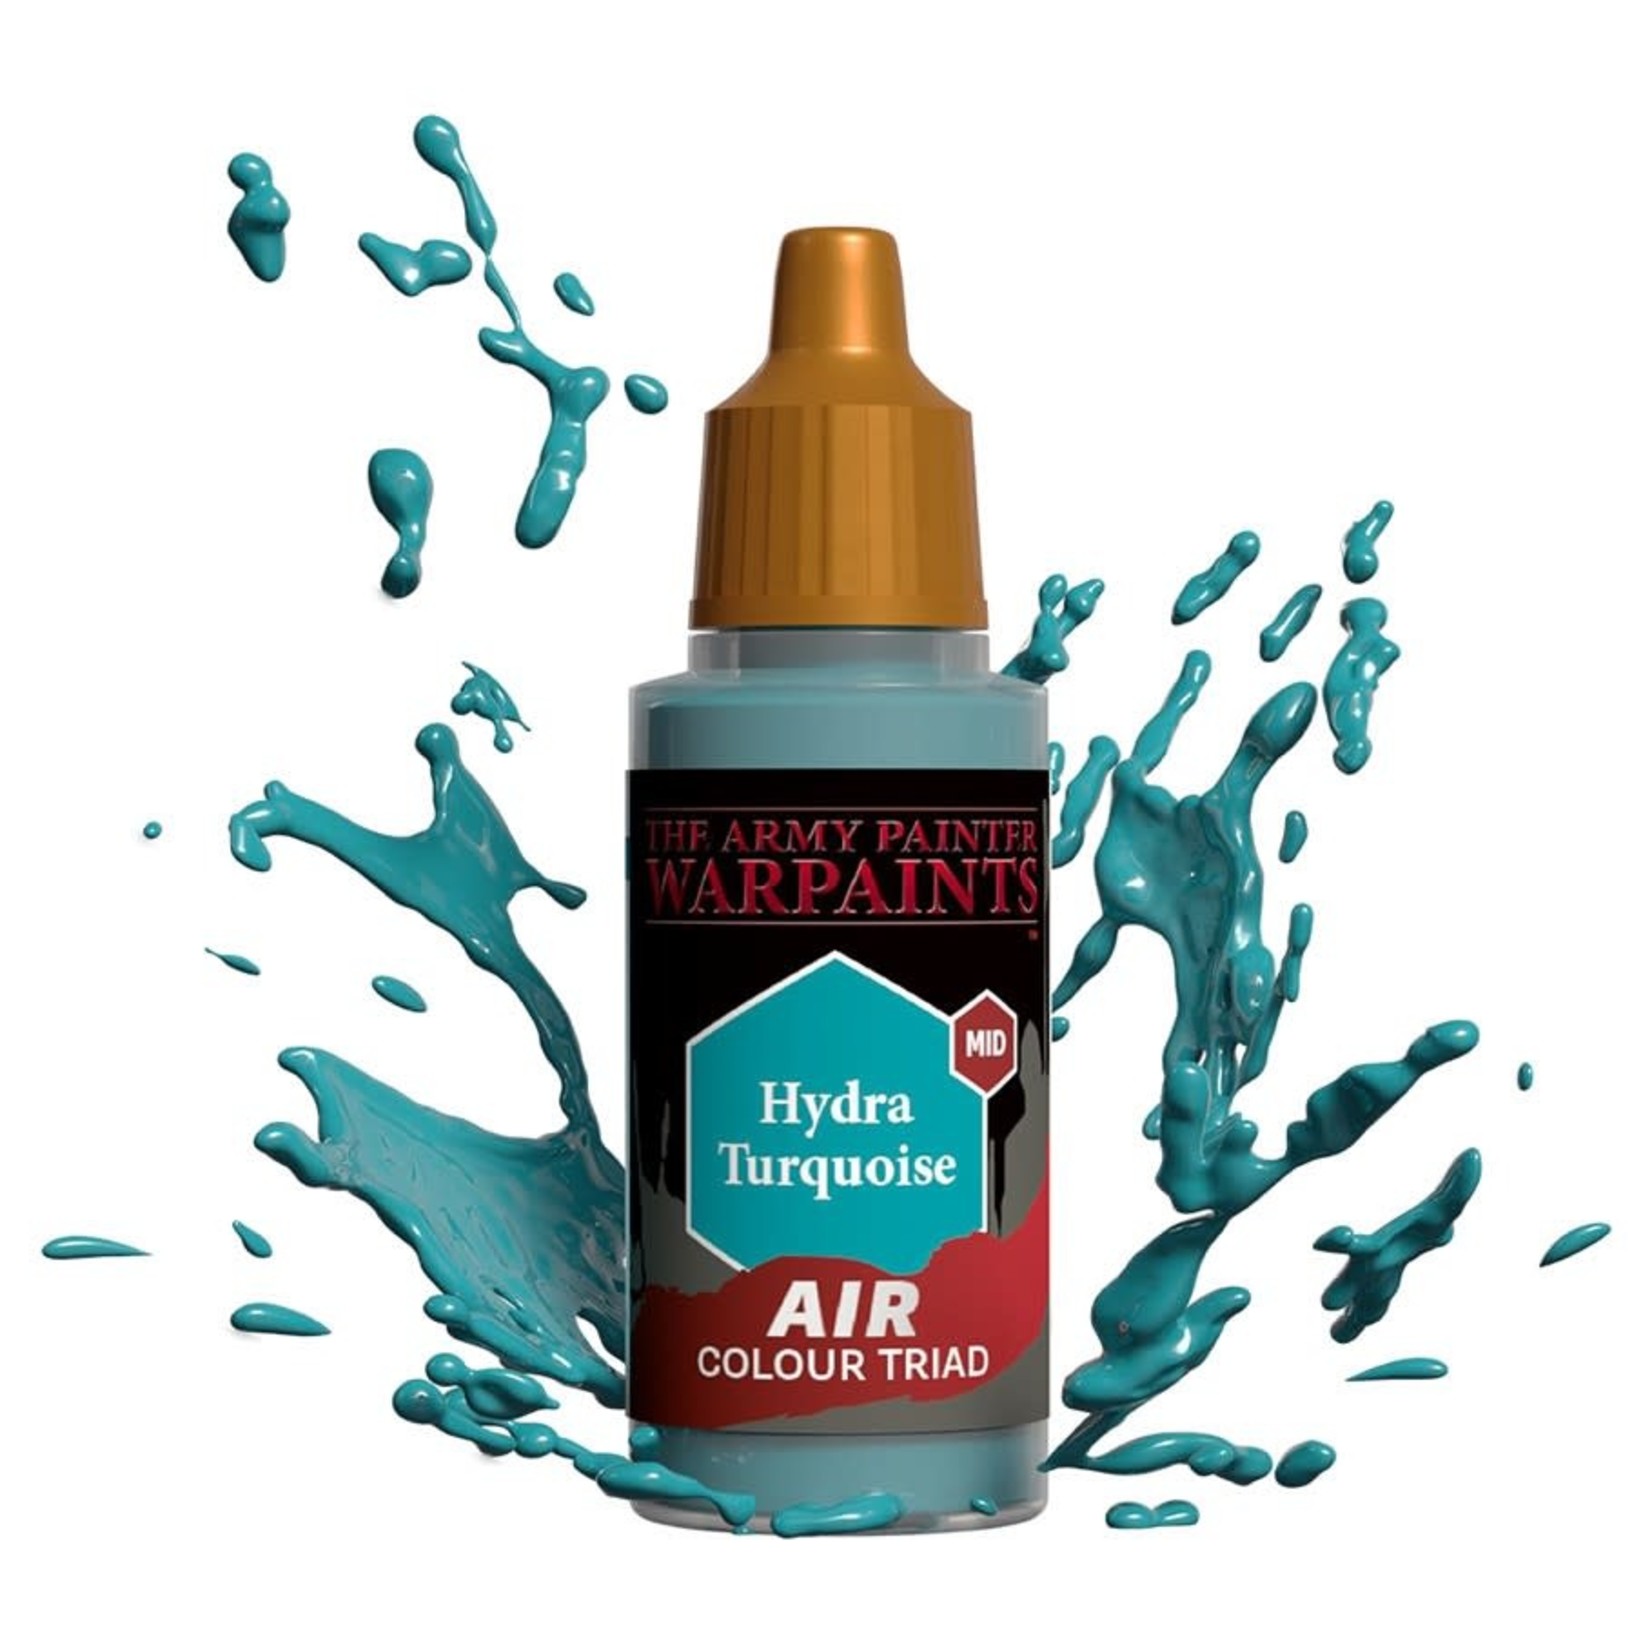 The Army Painter The Army Painter Hydra Turquoise Air 18ml